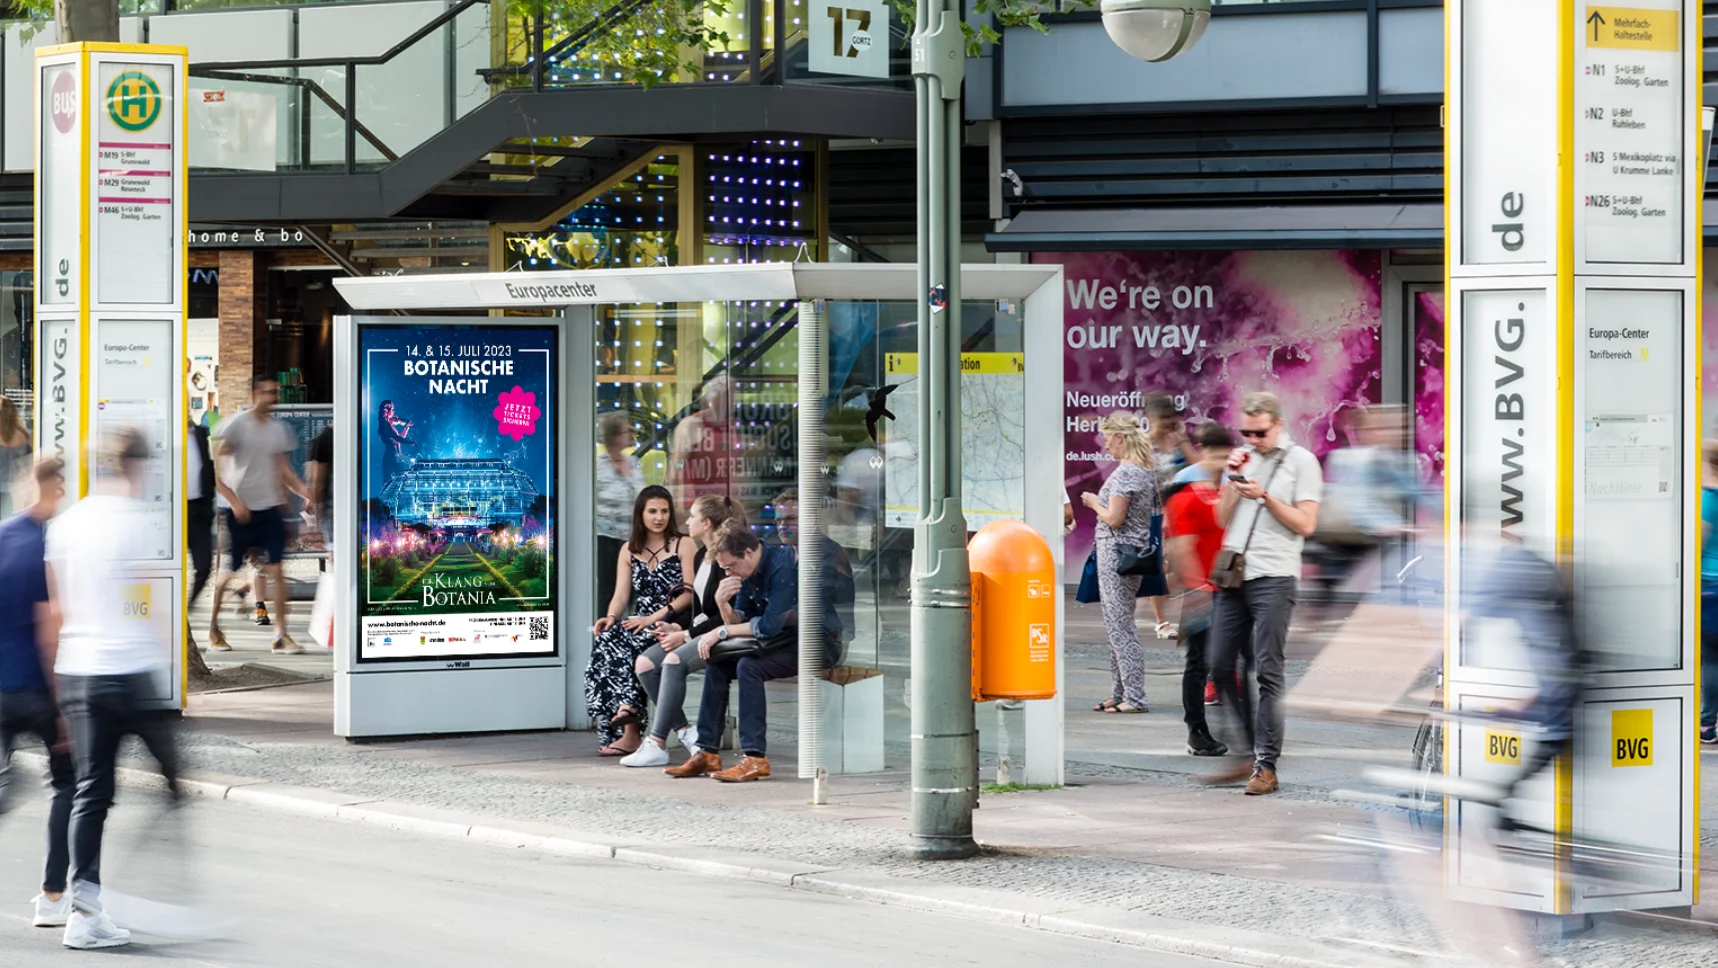 A picture shows a bus stop with a poster for Botanical Night in the Botanical Garden Berlin.